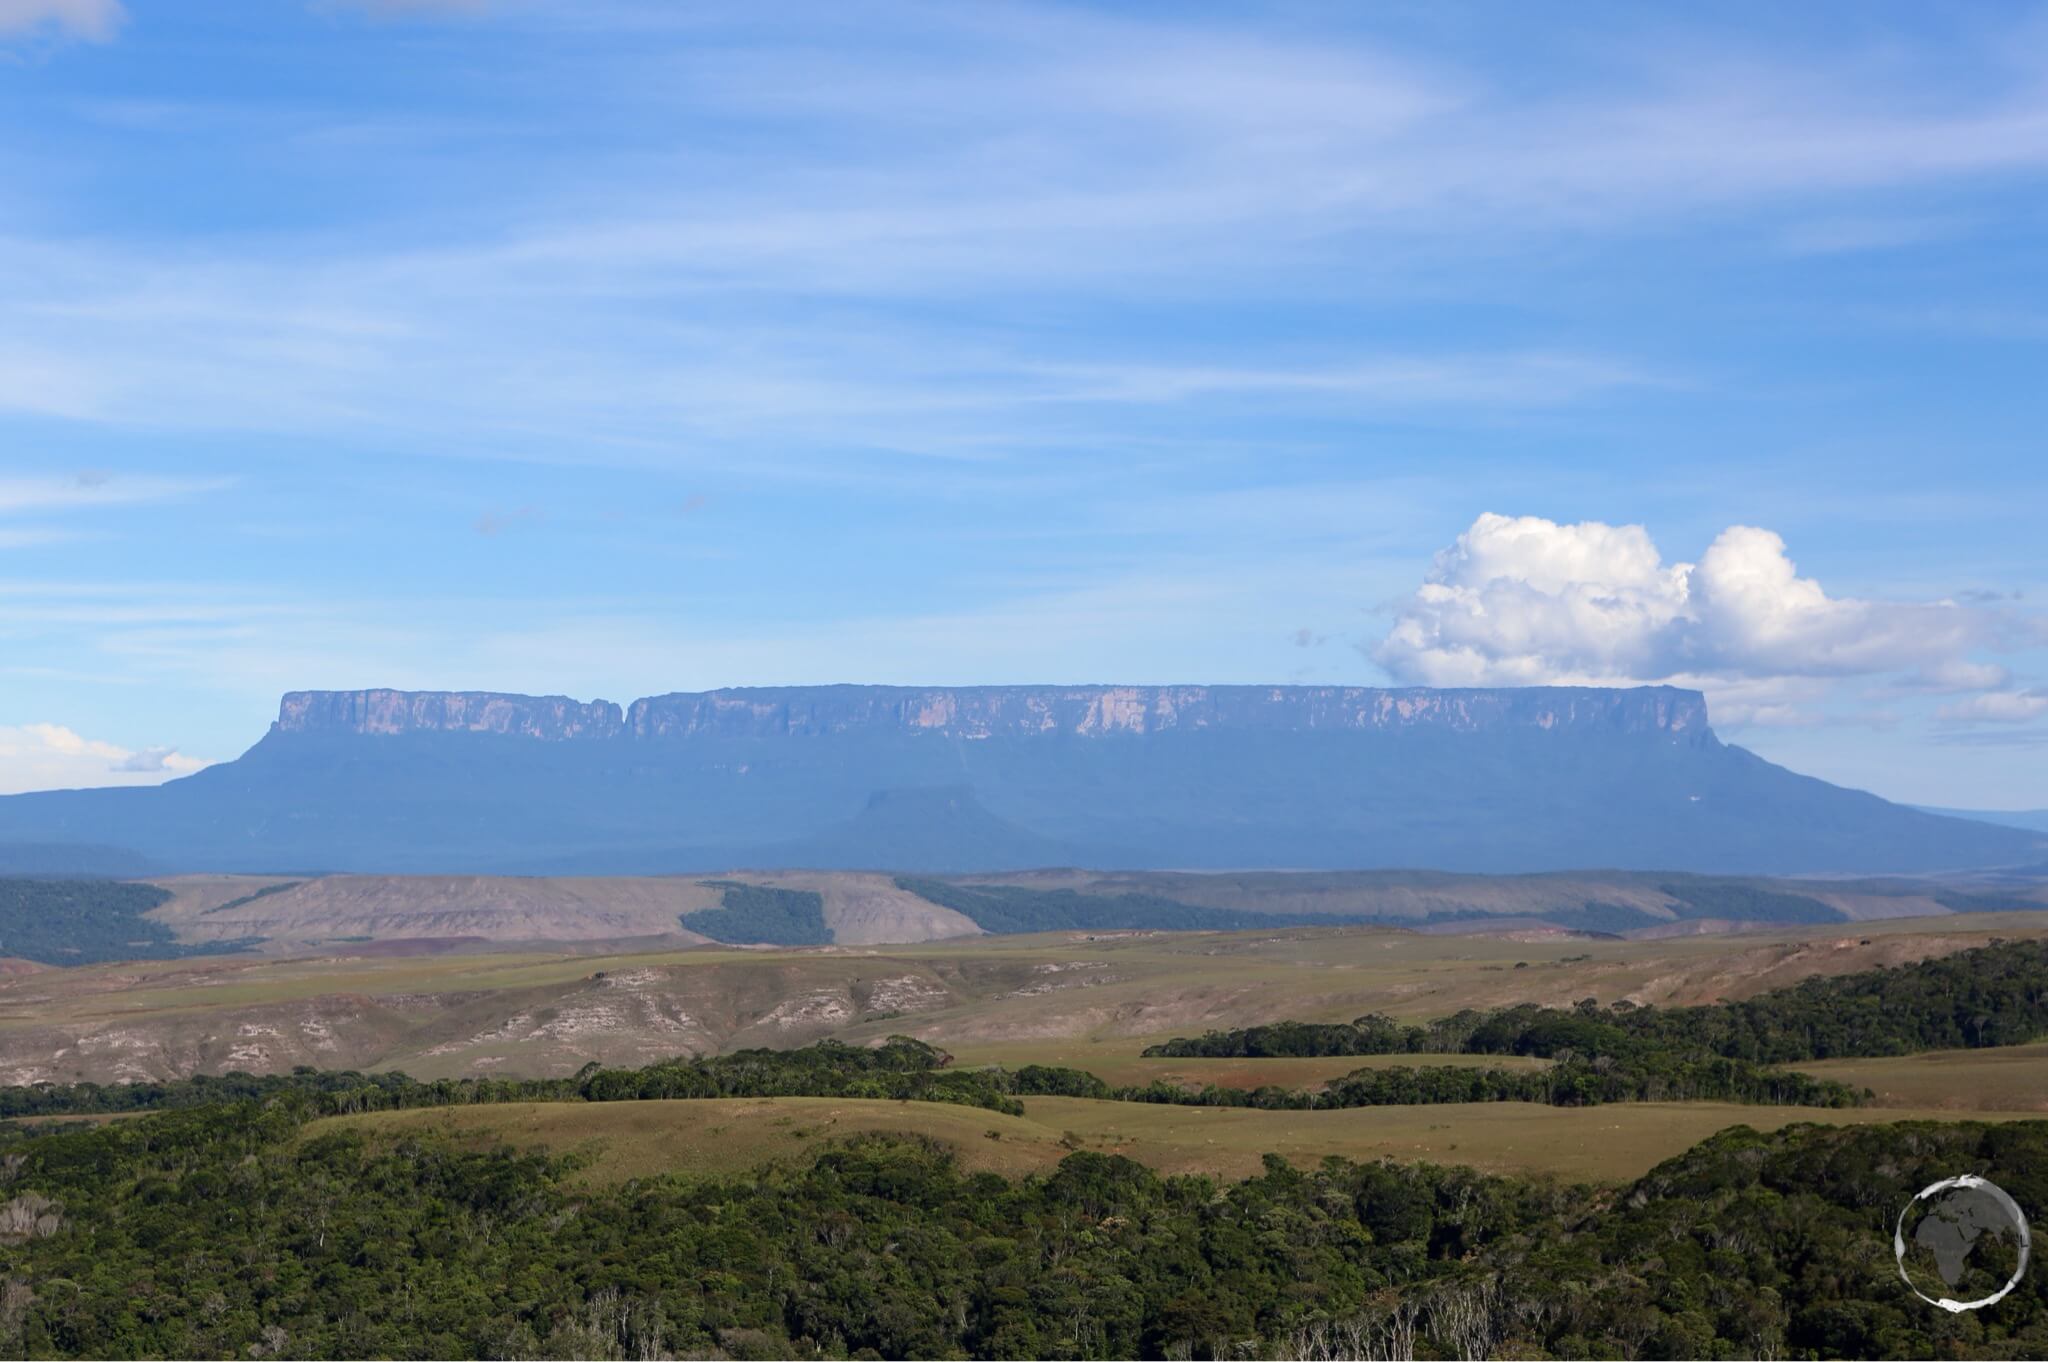 A table-top mountain, Mount Roraima is bounded on all sides by cliffs which rise 400 metres (1,300 ft).